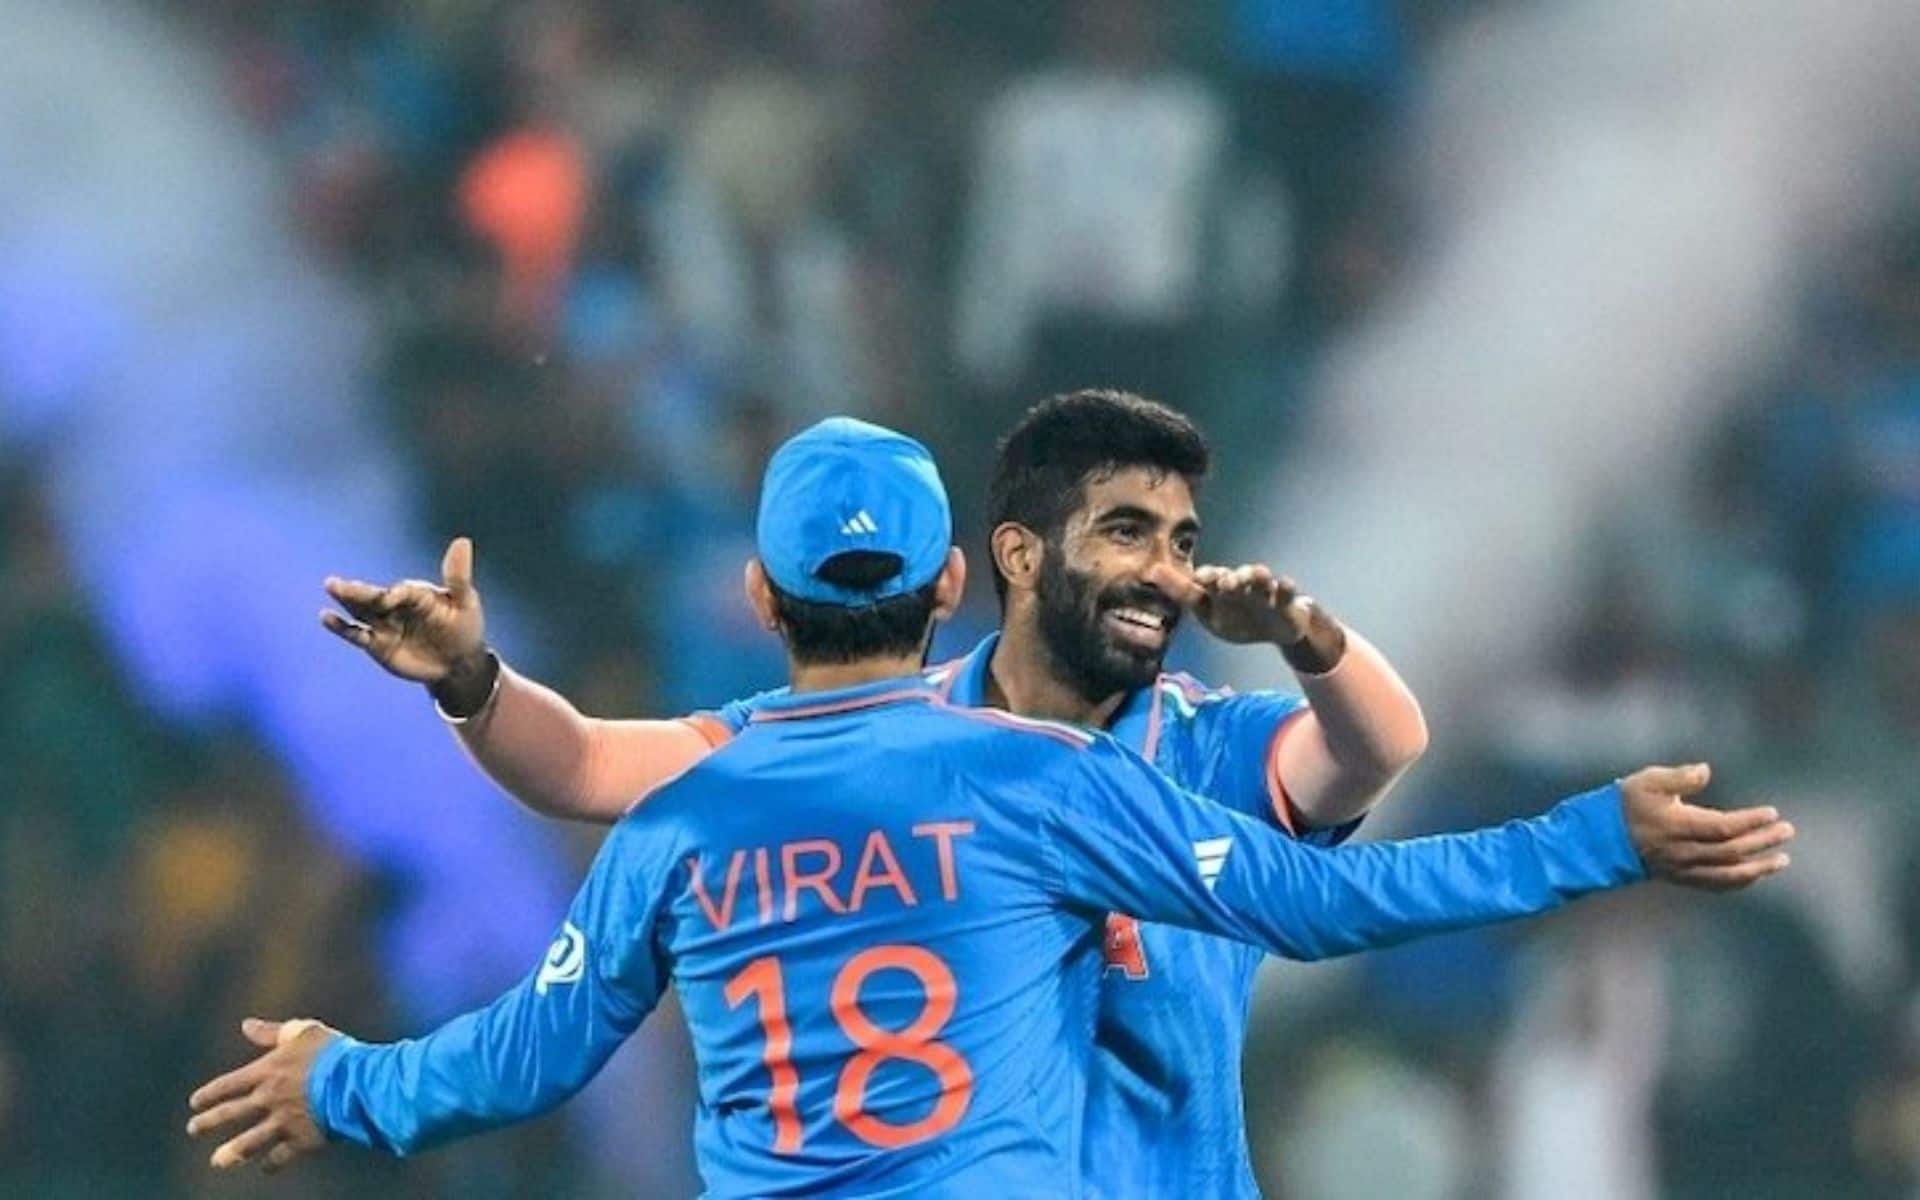 Virat Kohli, Jasprit Bumrah expected to play big role for IND in T20 World Cup (X.com)